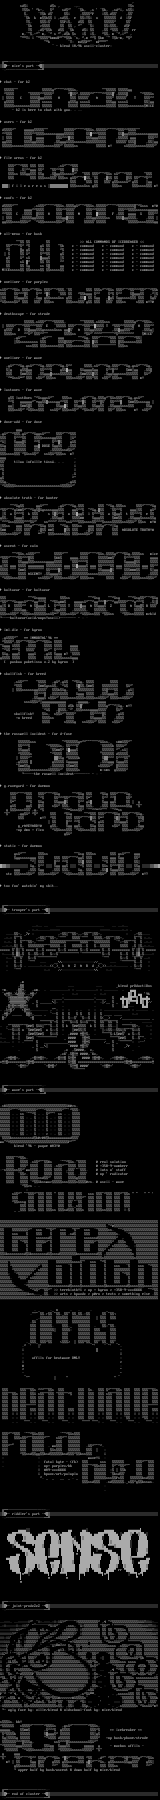 ascii logocluster 10/96 by multiple artists